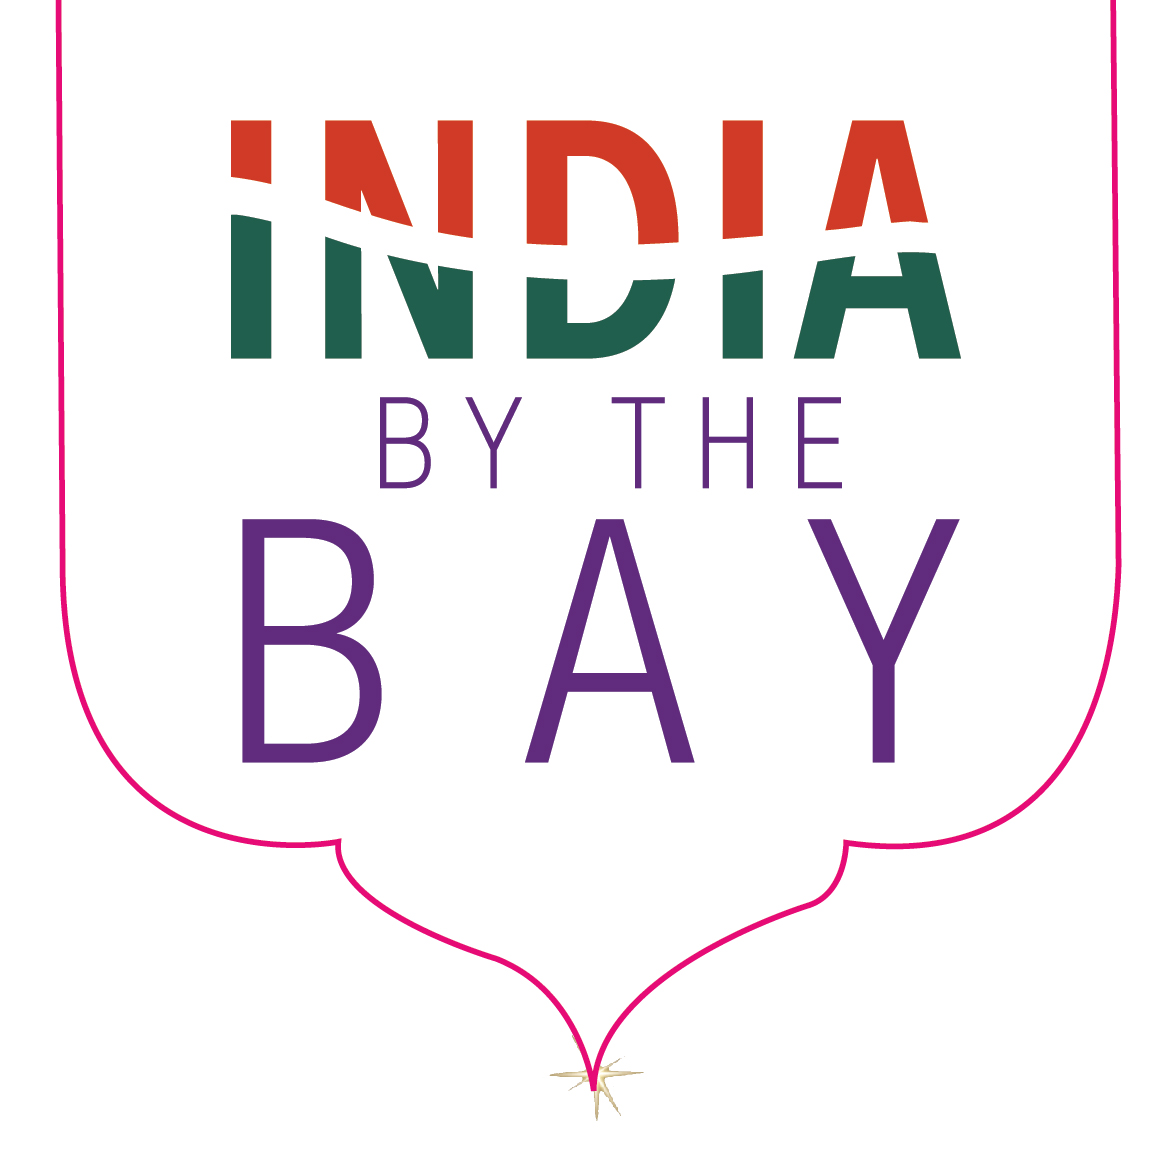 India by the Bay